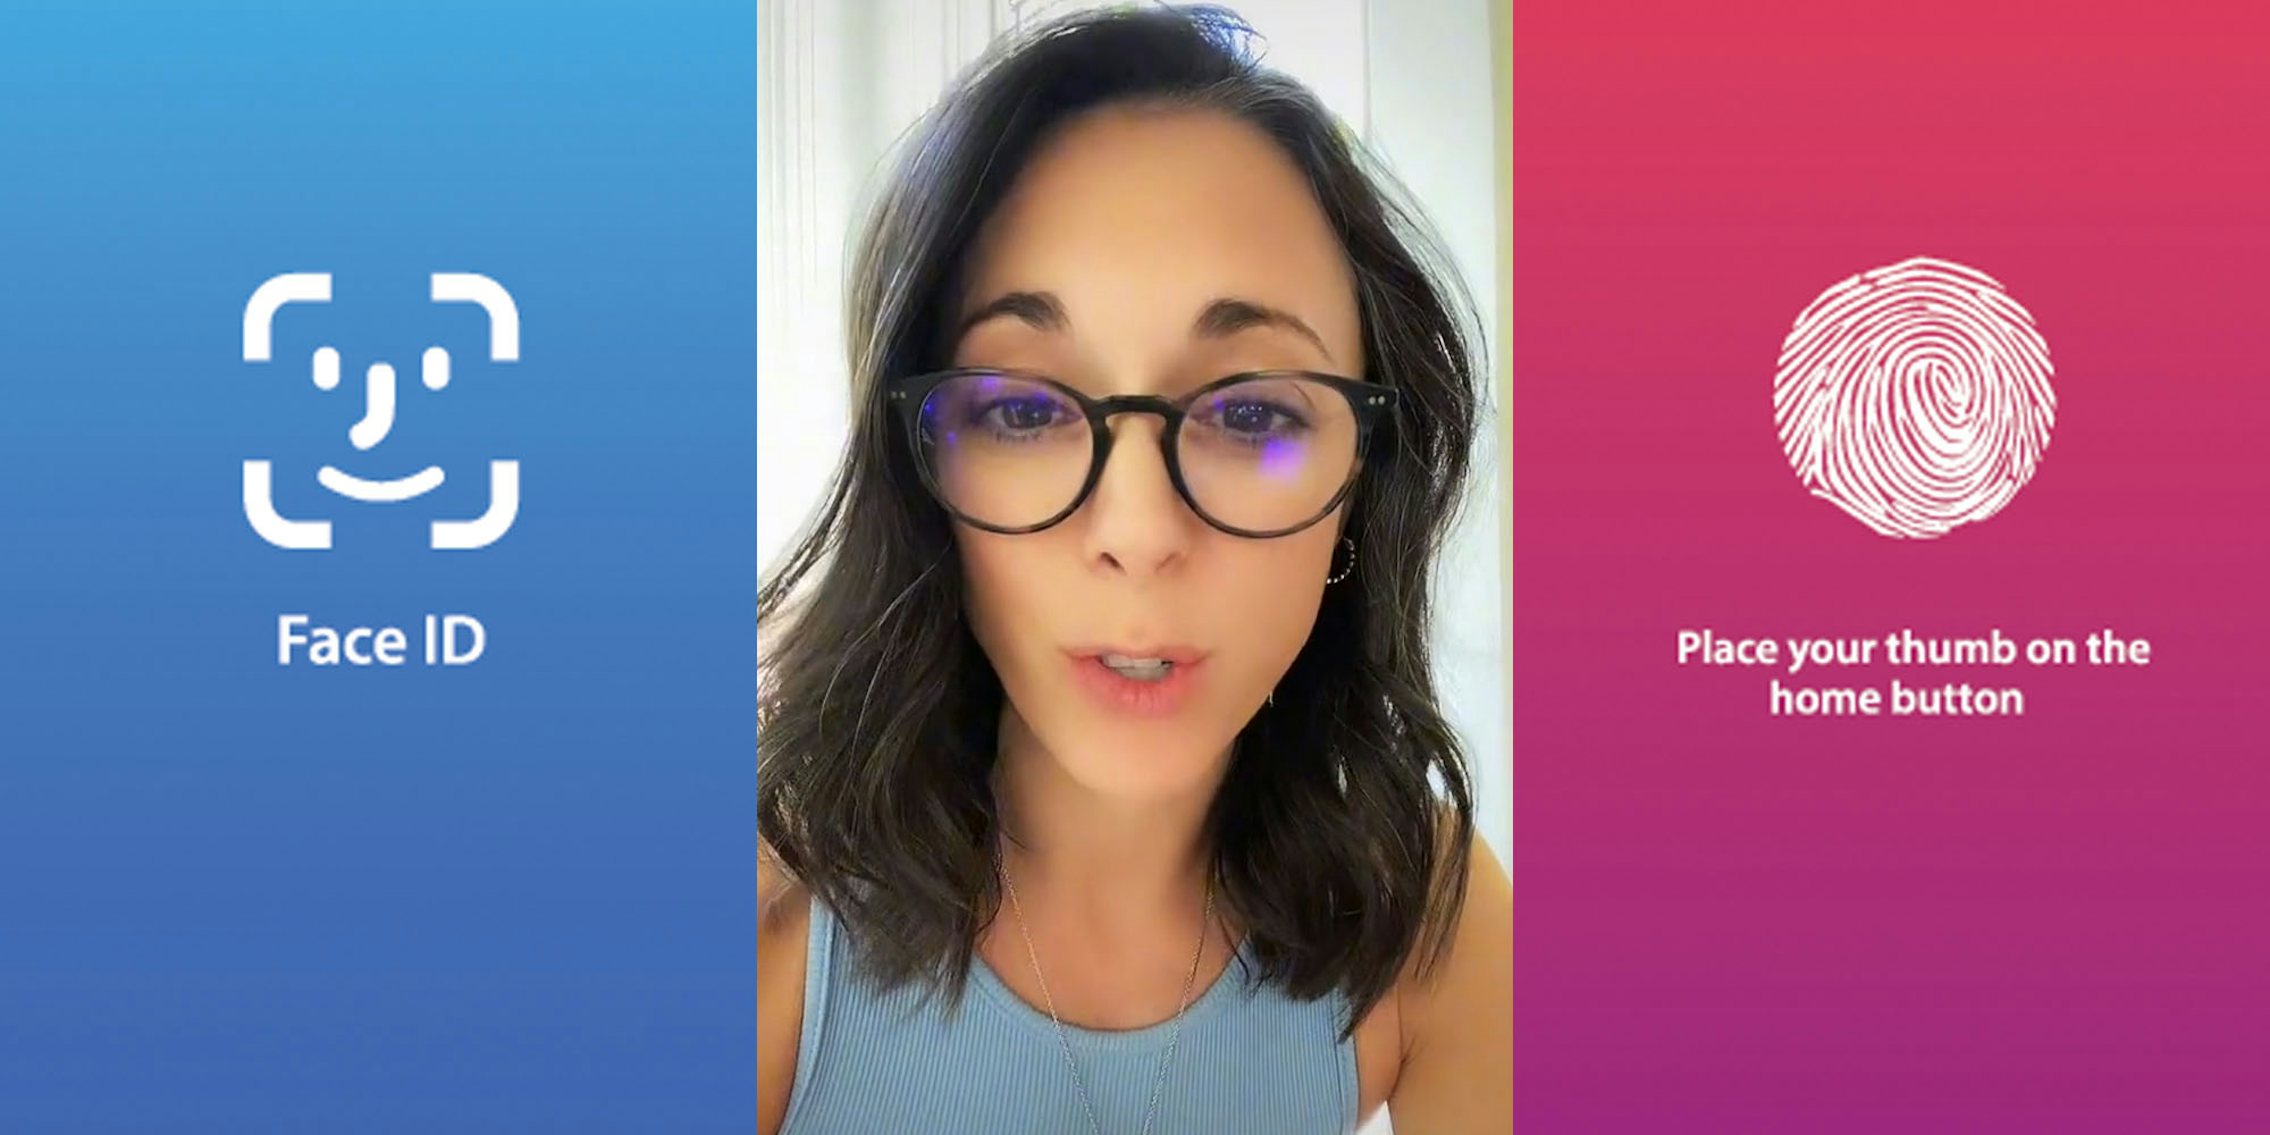 Face ID recognition symbol and caption 'Face ID' on blue to darker blue ombre background (l) woman speaking in tank top (c) Finger print identification symbol caption 'Place your thumb on the home button' pink to purple ombre background (r)